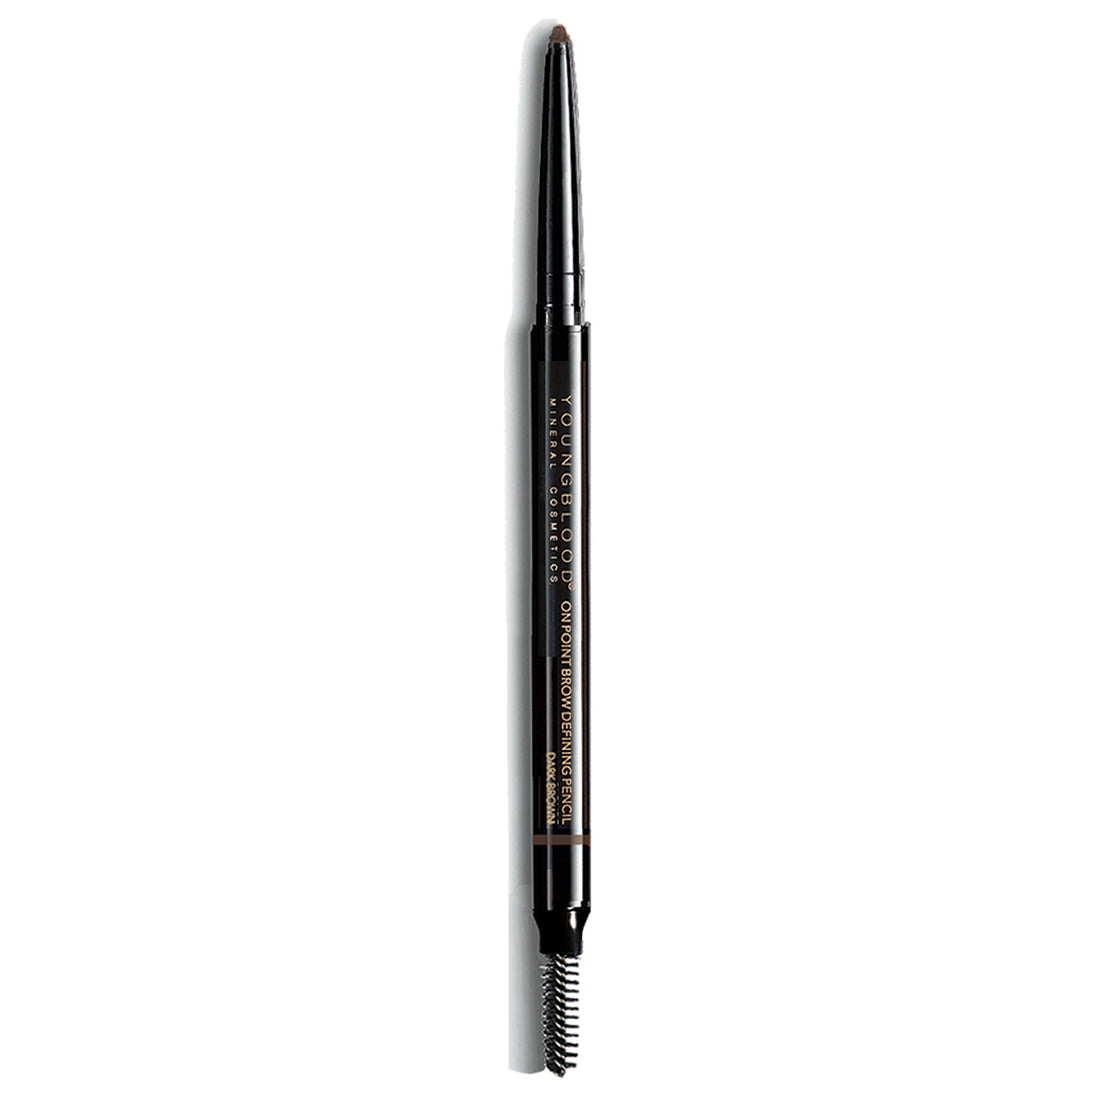 YOUNGBLOOD eyebrow pencil with brush 0.35 g.